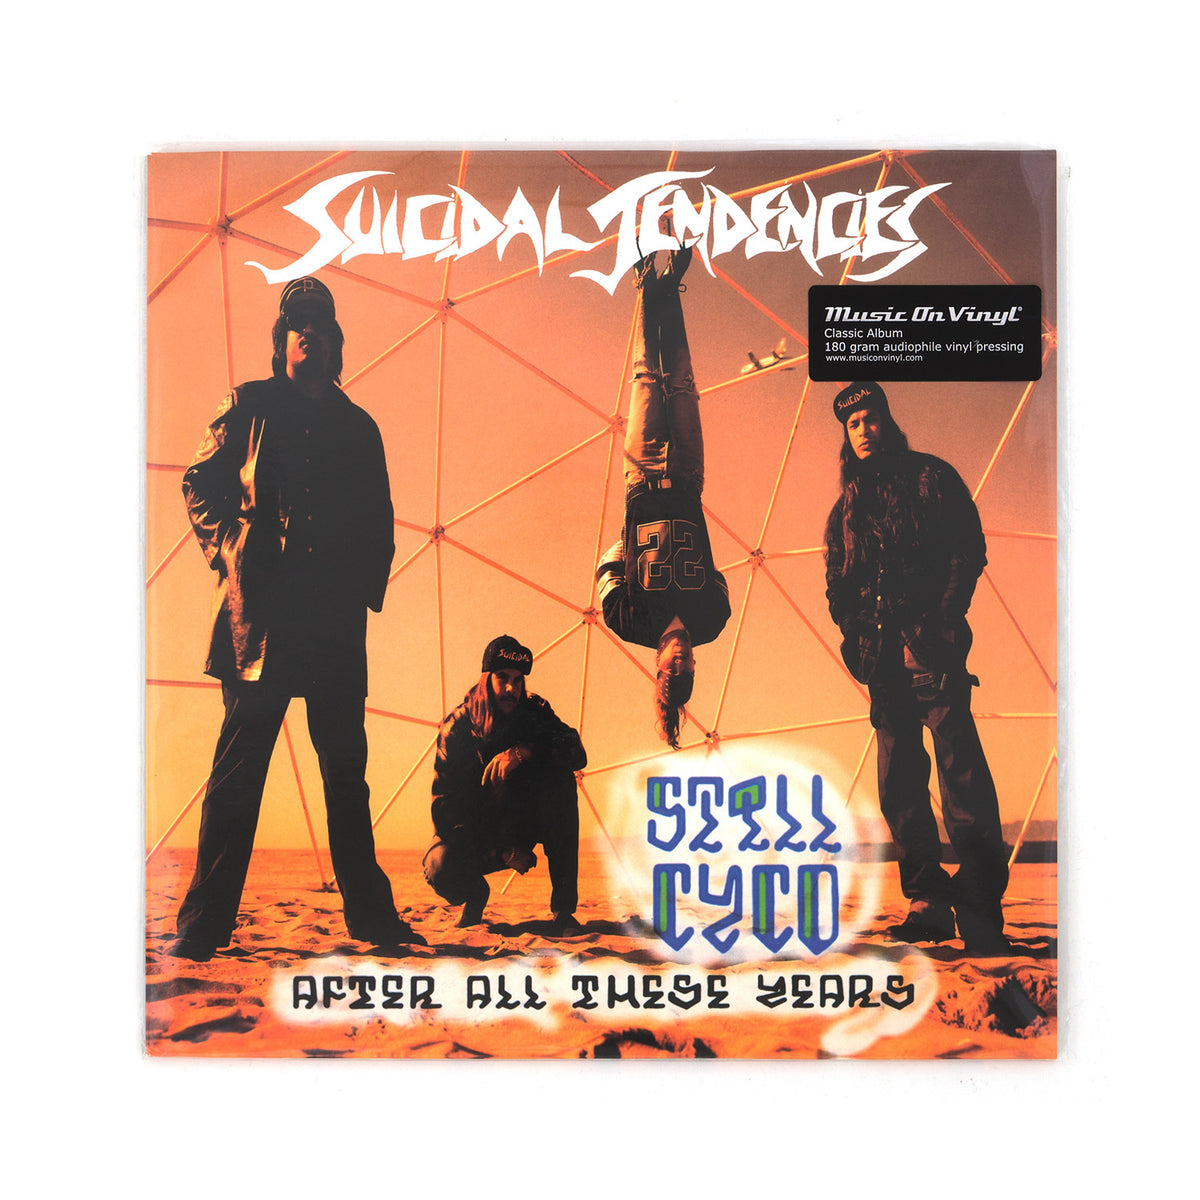 Suicidal Tendencies - Still Cyco After All These Years LP - Concrete